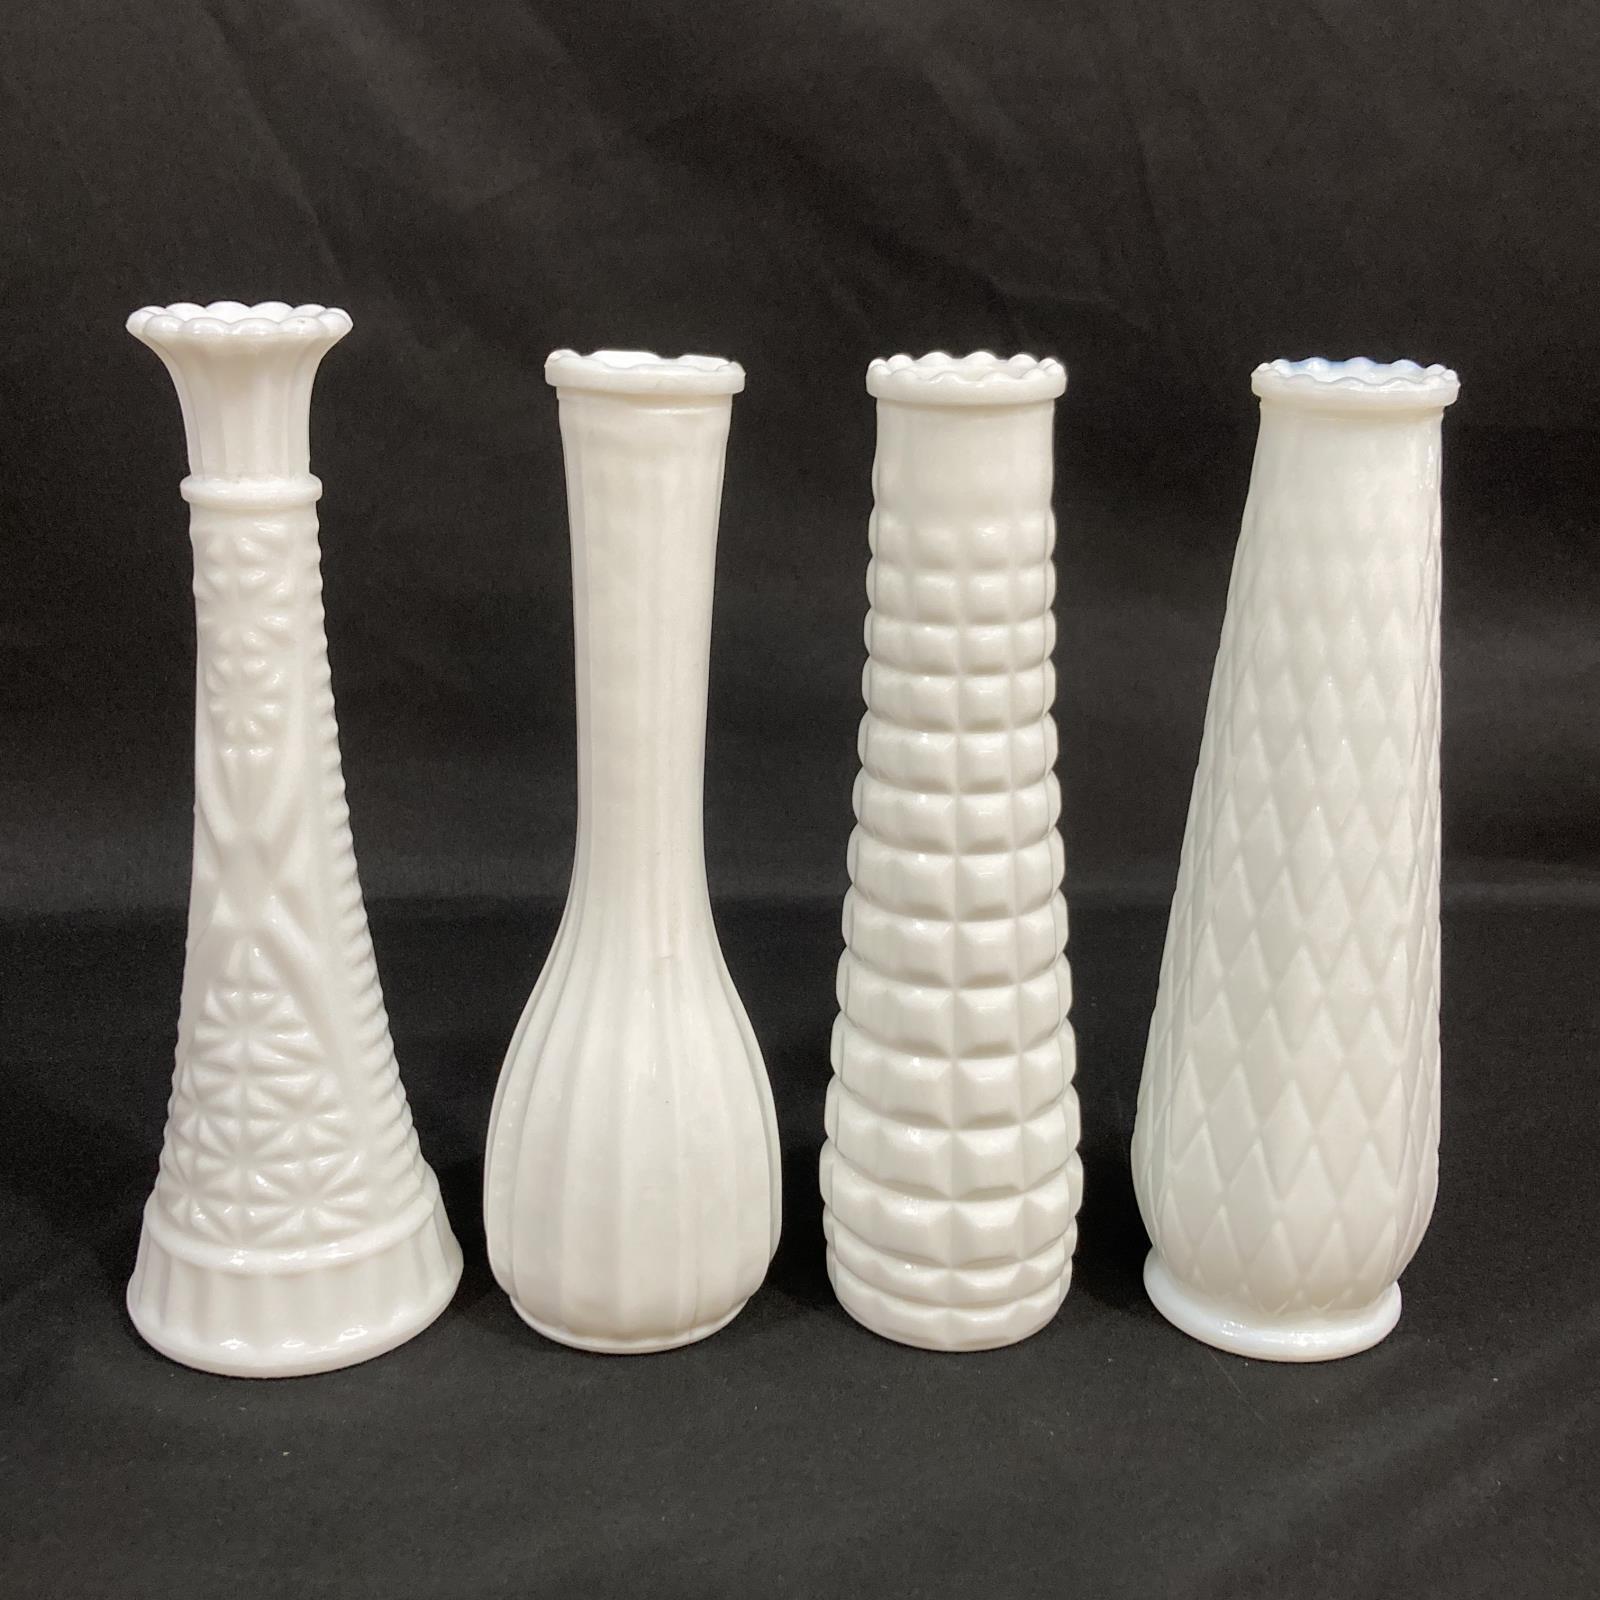 4 Vintage E.O. Brody Co. Milk Glass White Bud Vase 8.5 to 9in Assorted Patterns